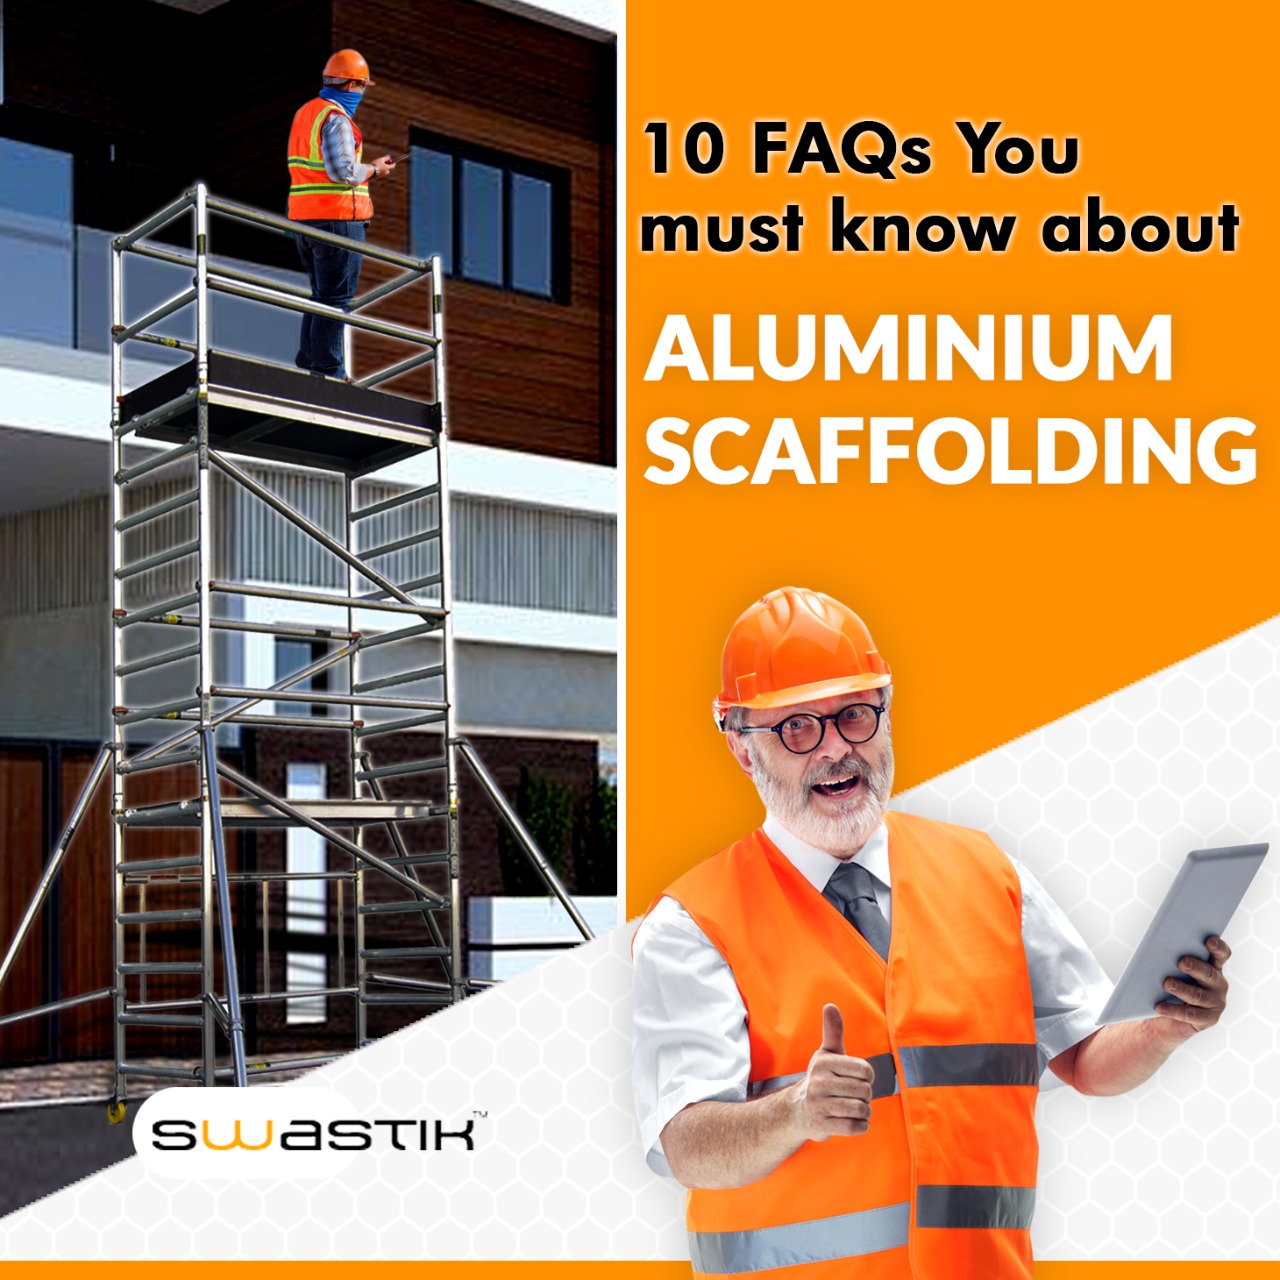 10 FAQs You must know about aluminium scaffolding